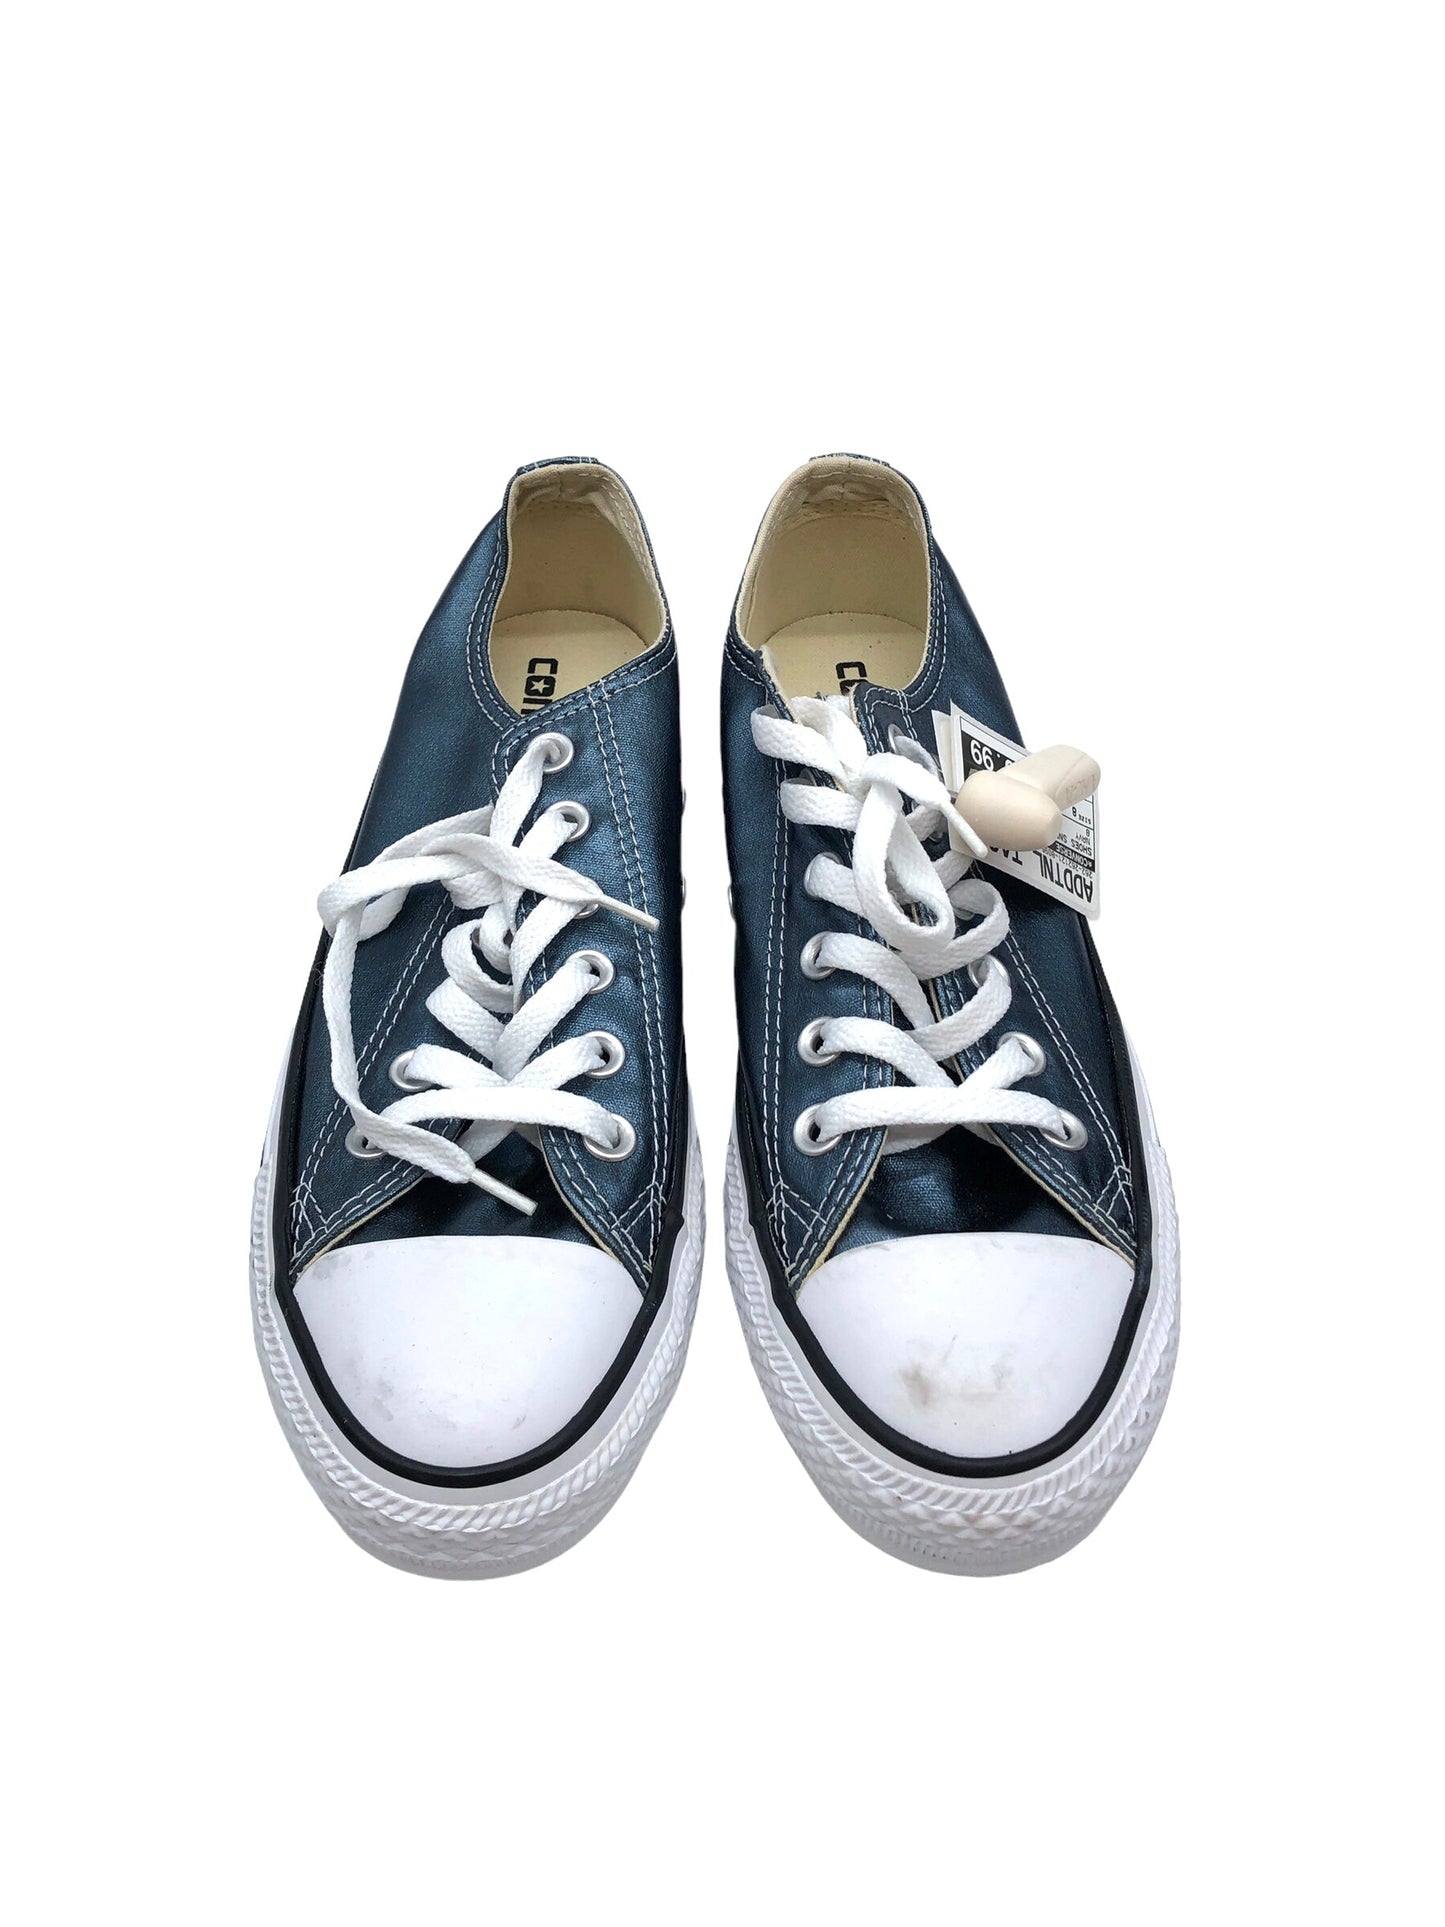 Navy Shoes Sneakers Converse, Size 8